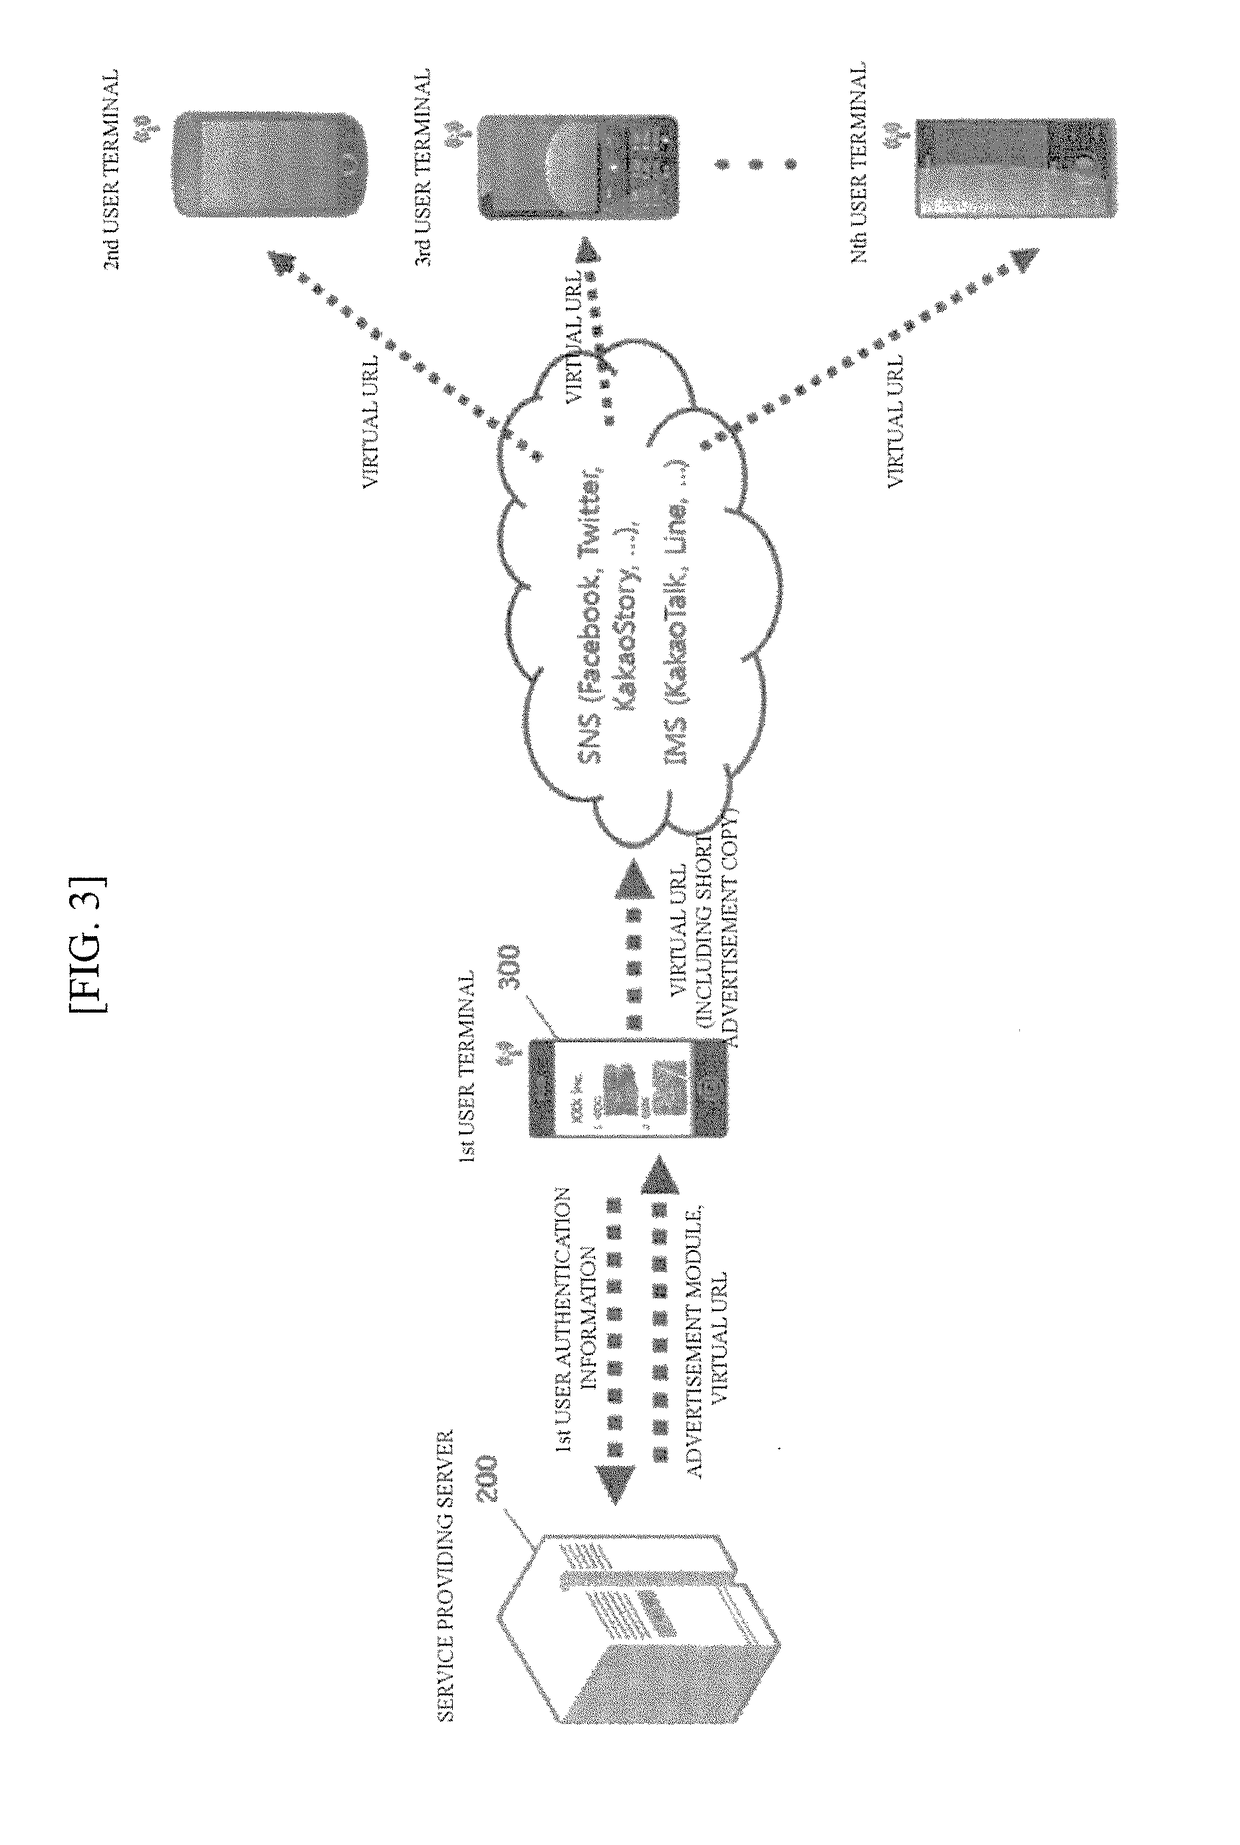 System and method for providing viral marketing service